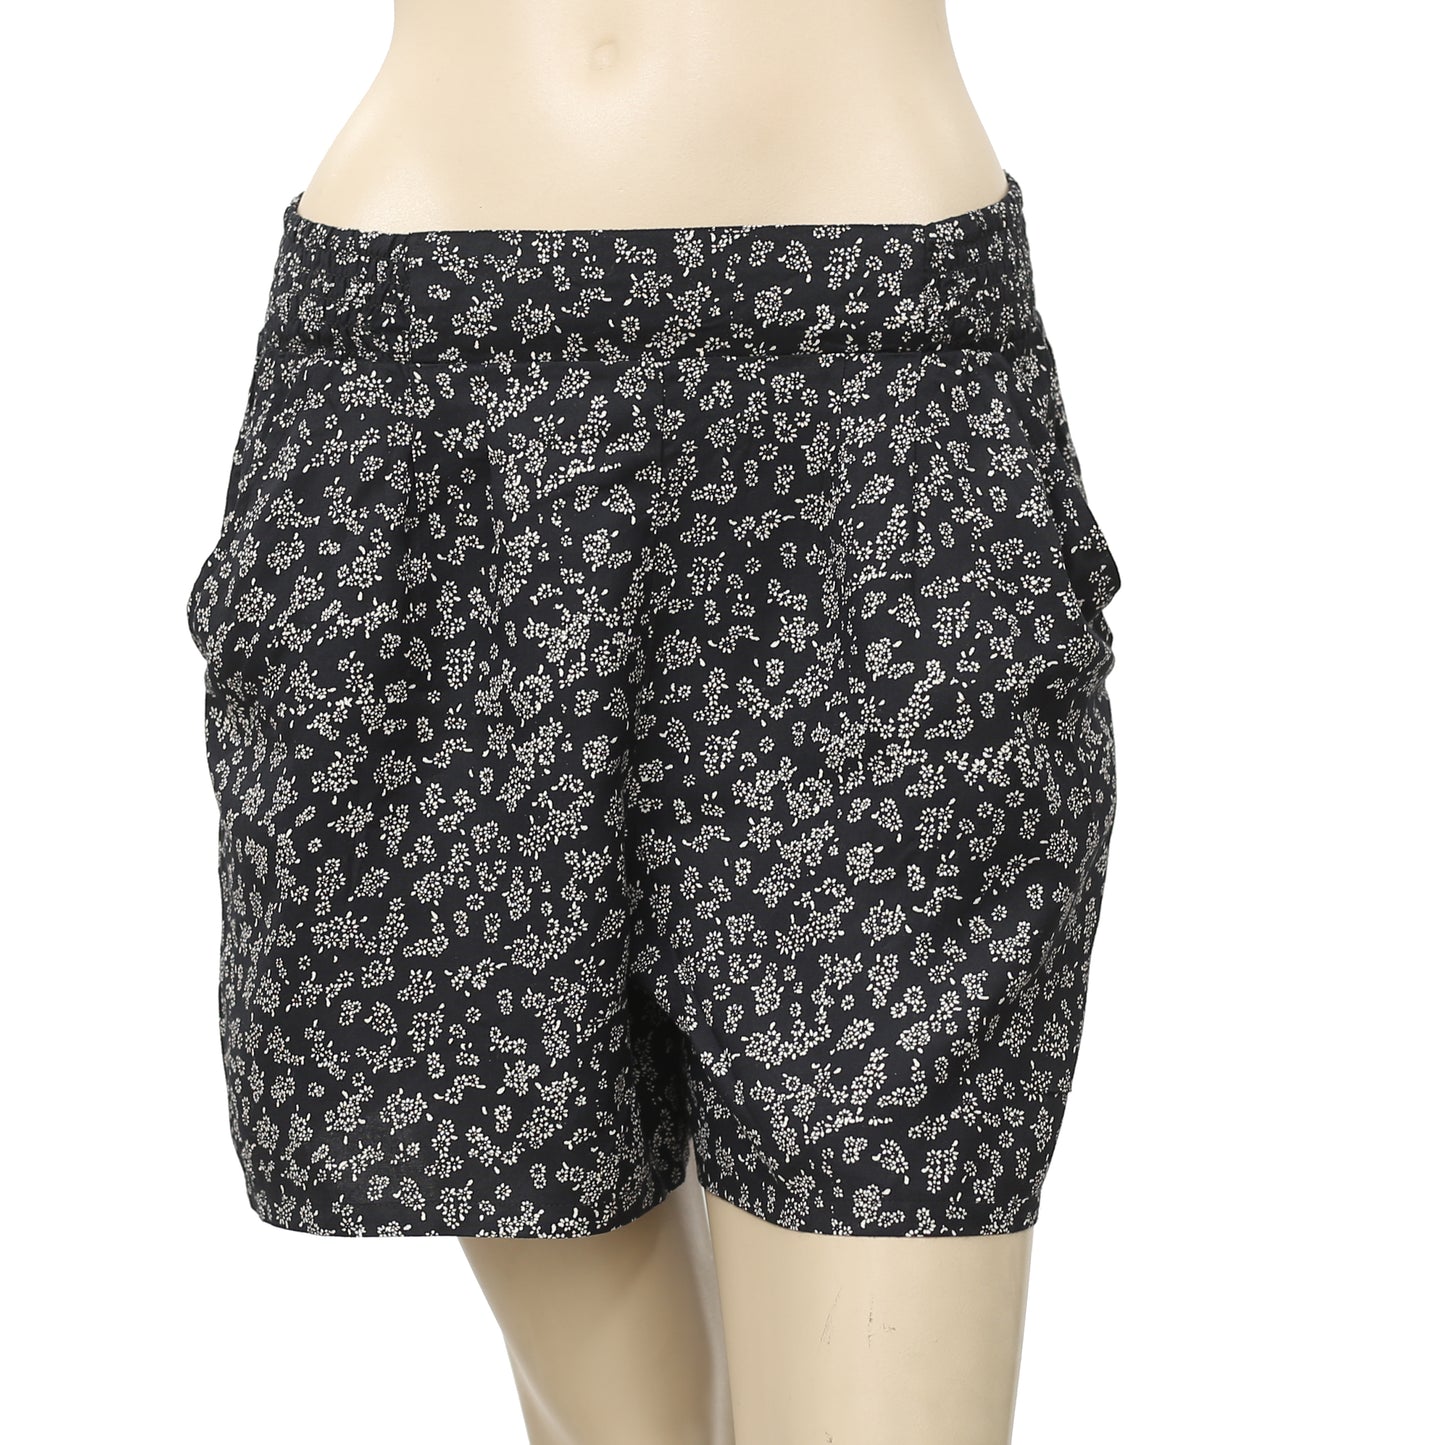 Pins & Needles Urban Outfitters Ditsy Printed Shorts S